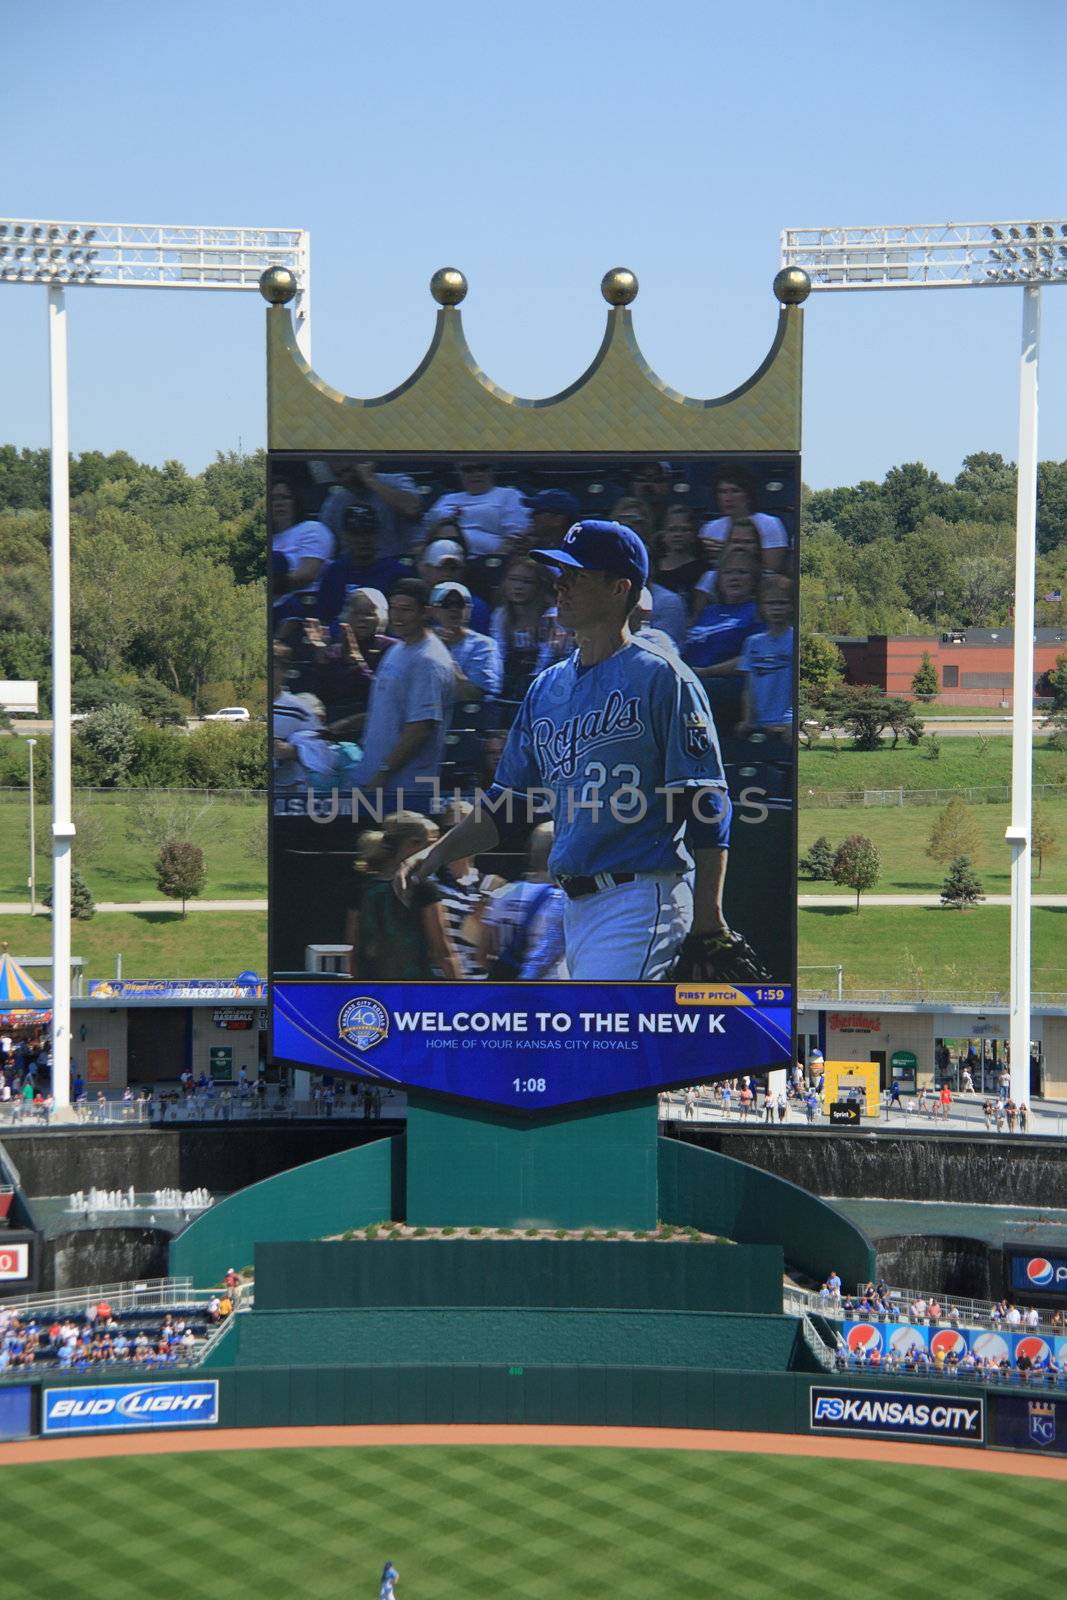 2009 Cy Young winning pitcher Zack Greinke enters a late season contest on the famous crown scoreboard